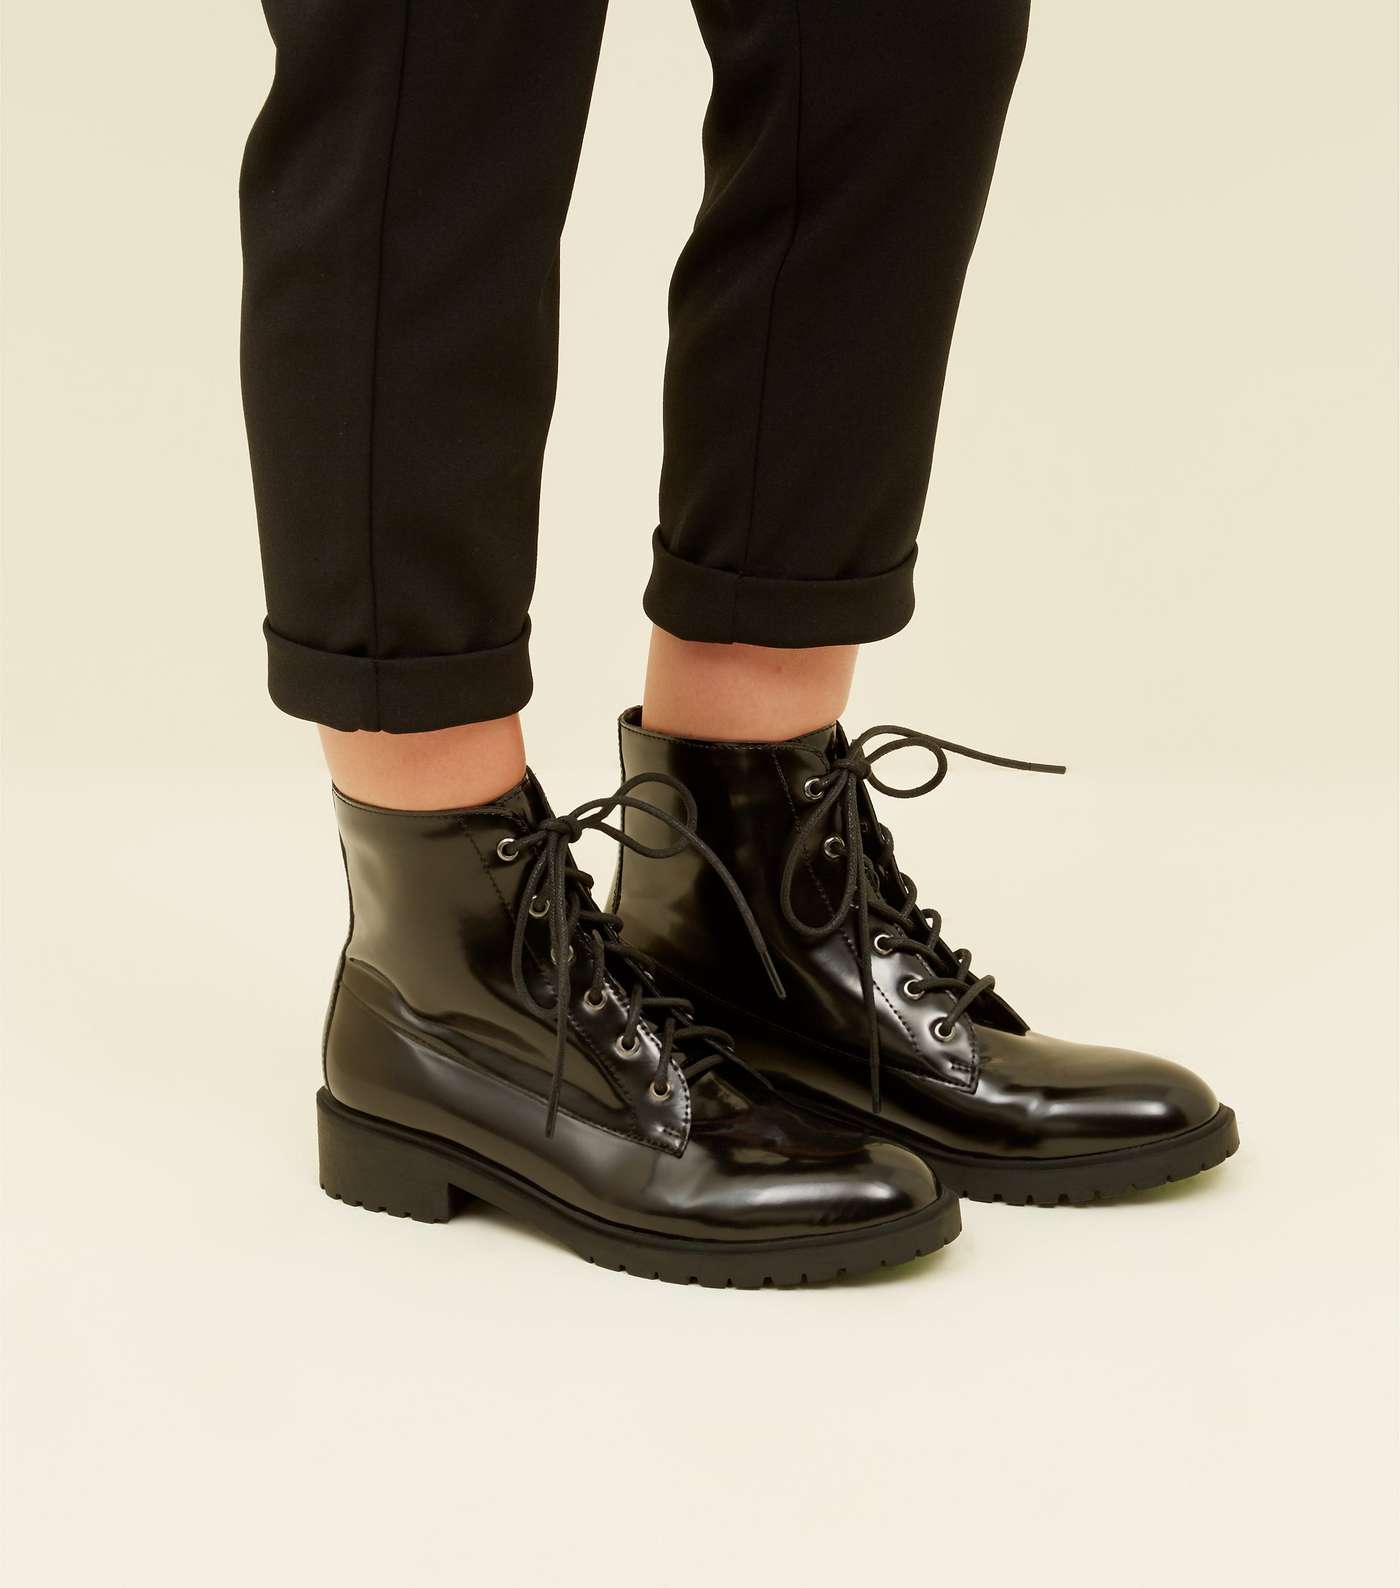 Girls Black Patent Lace Up Boots Image 2